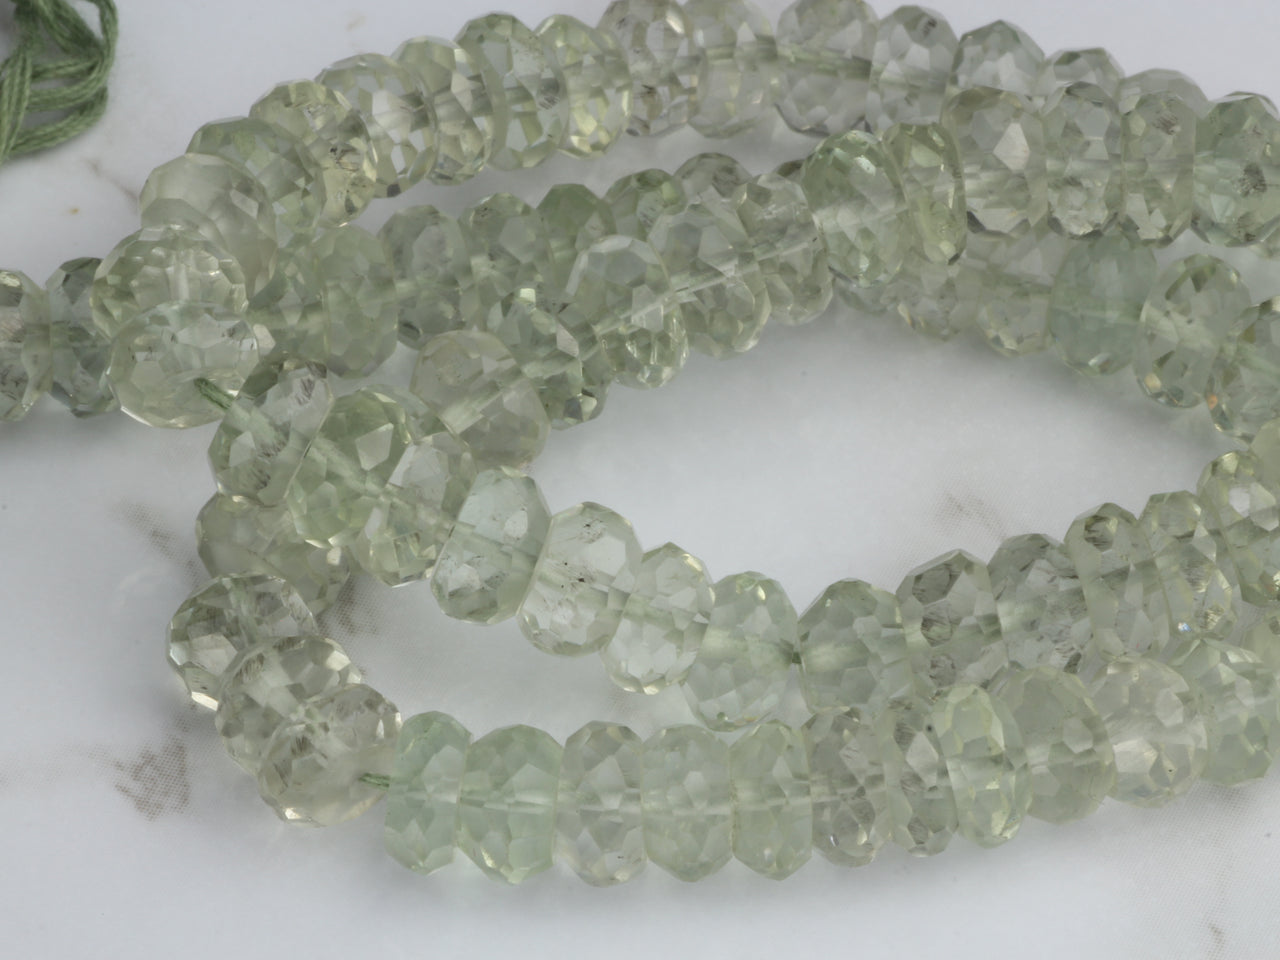 Green Amethyst 6mm Faceted Rondelles